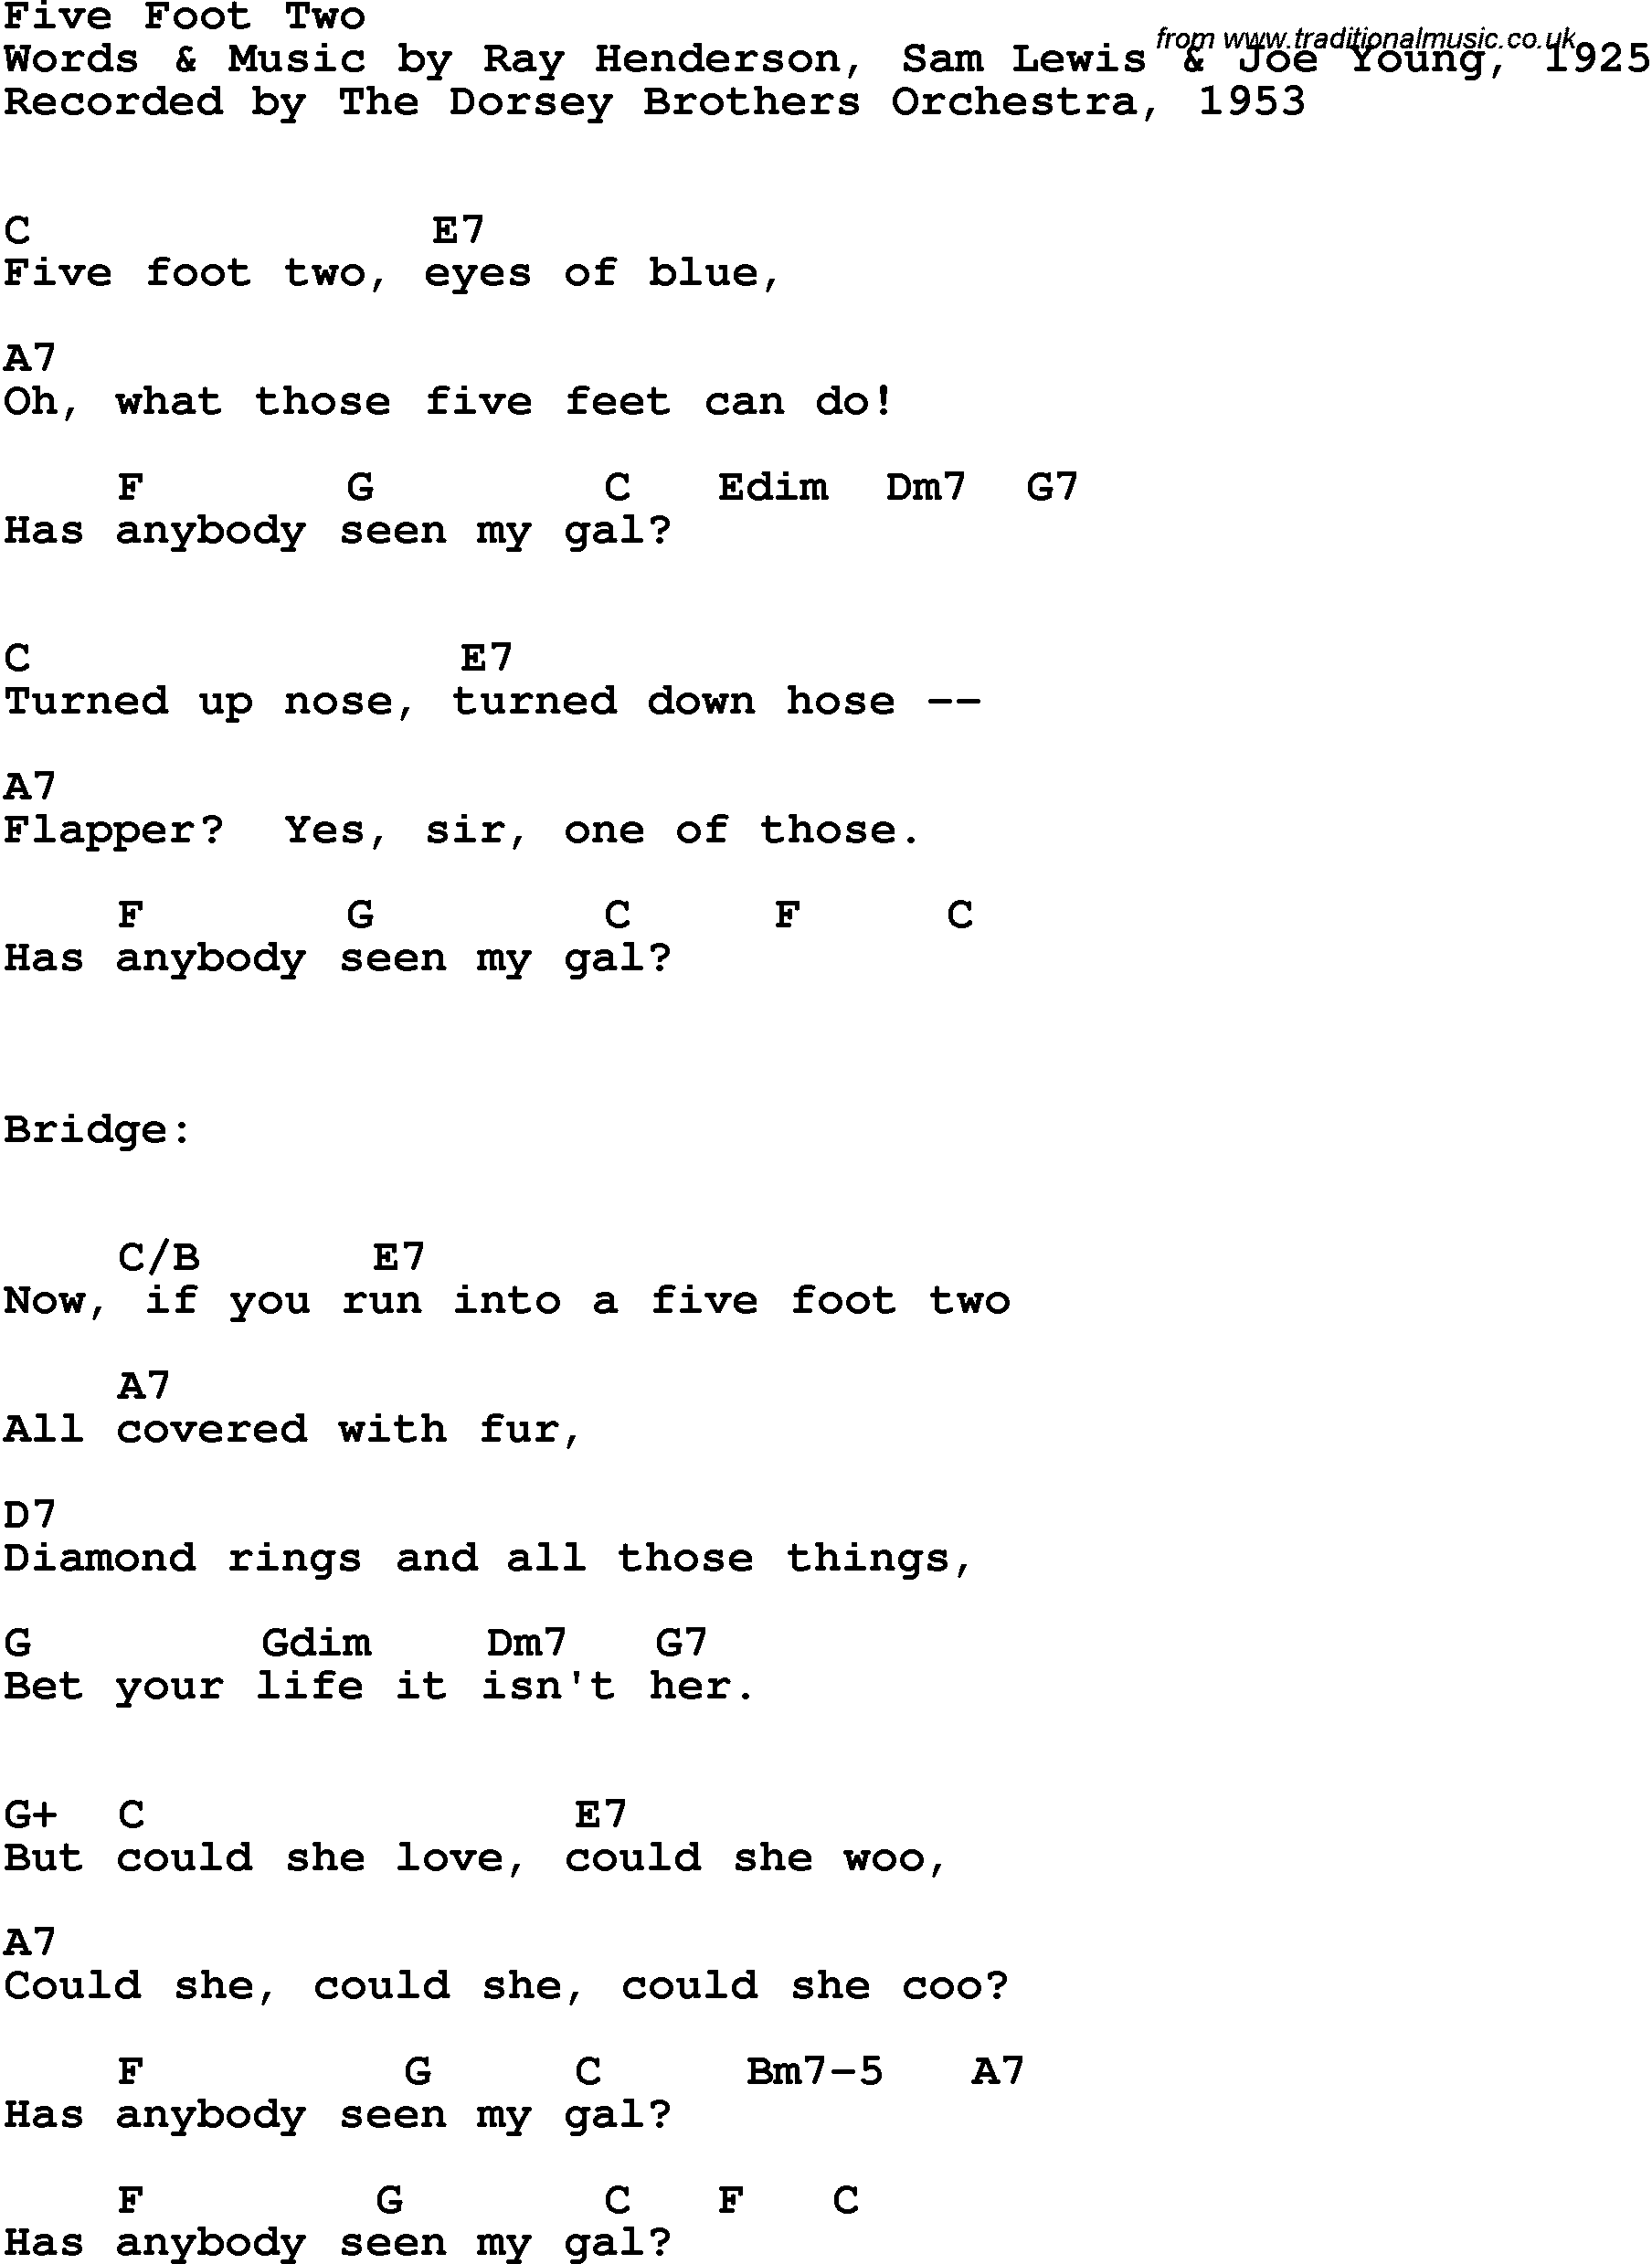 Song Lyrics with guitar chords for Five Foot Two - Dorsey Brothers Orchestra, 1953